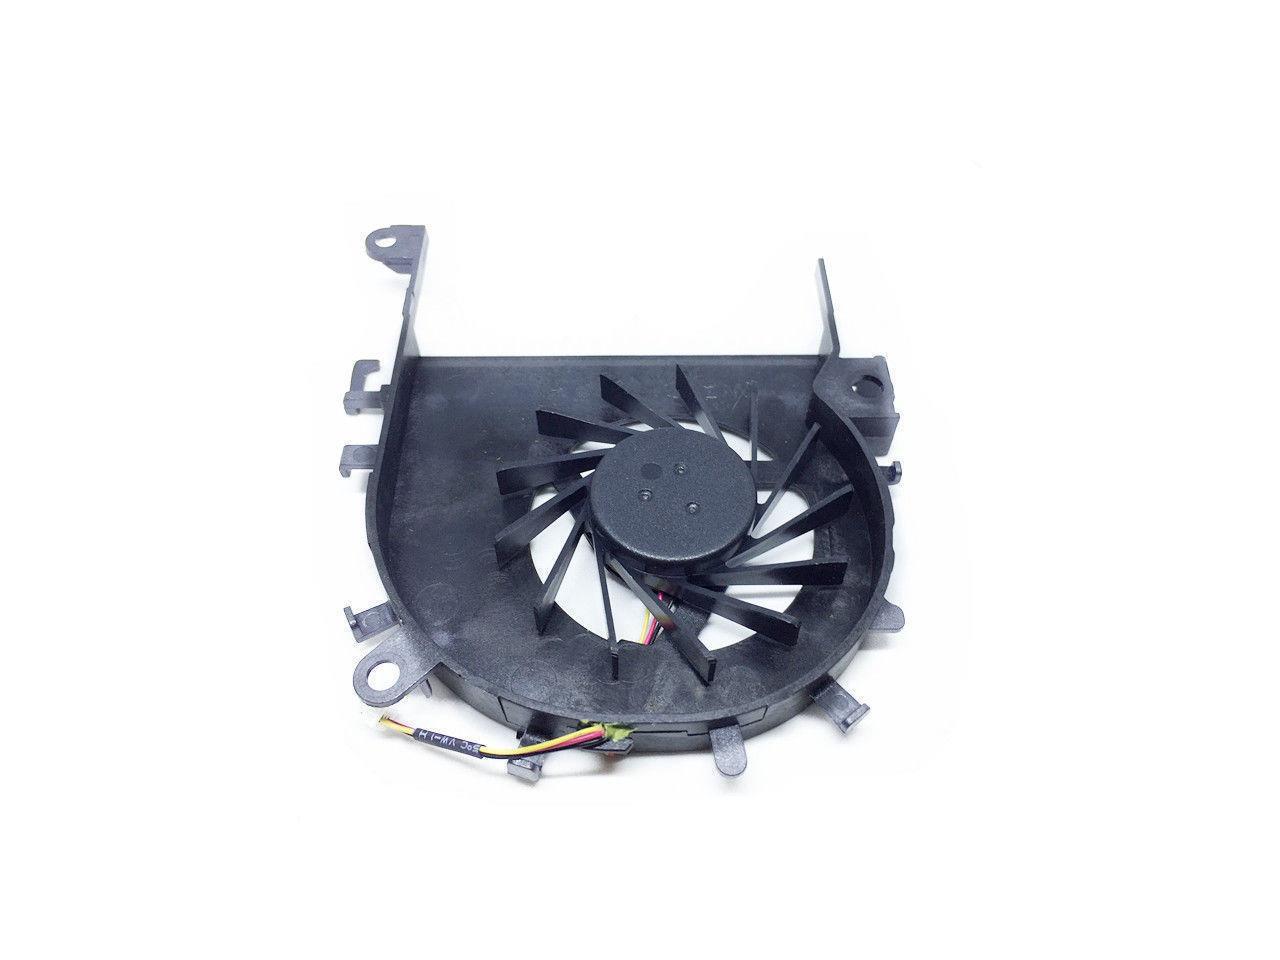 Cable Length: Other Cables CPU Cooling Fan for ACER eMachines E732 E732G E732Z E732ZG DC Brushless Laptop Cooler Radiators Cooling Fan